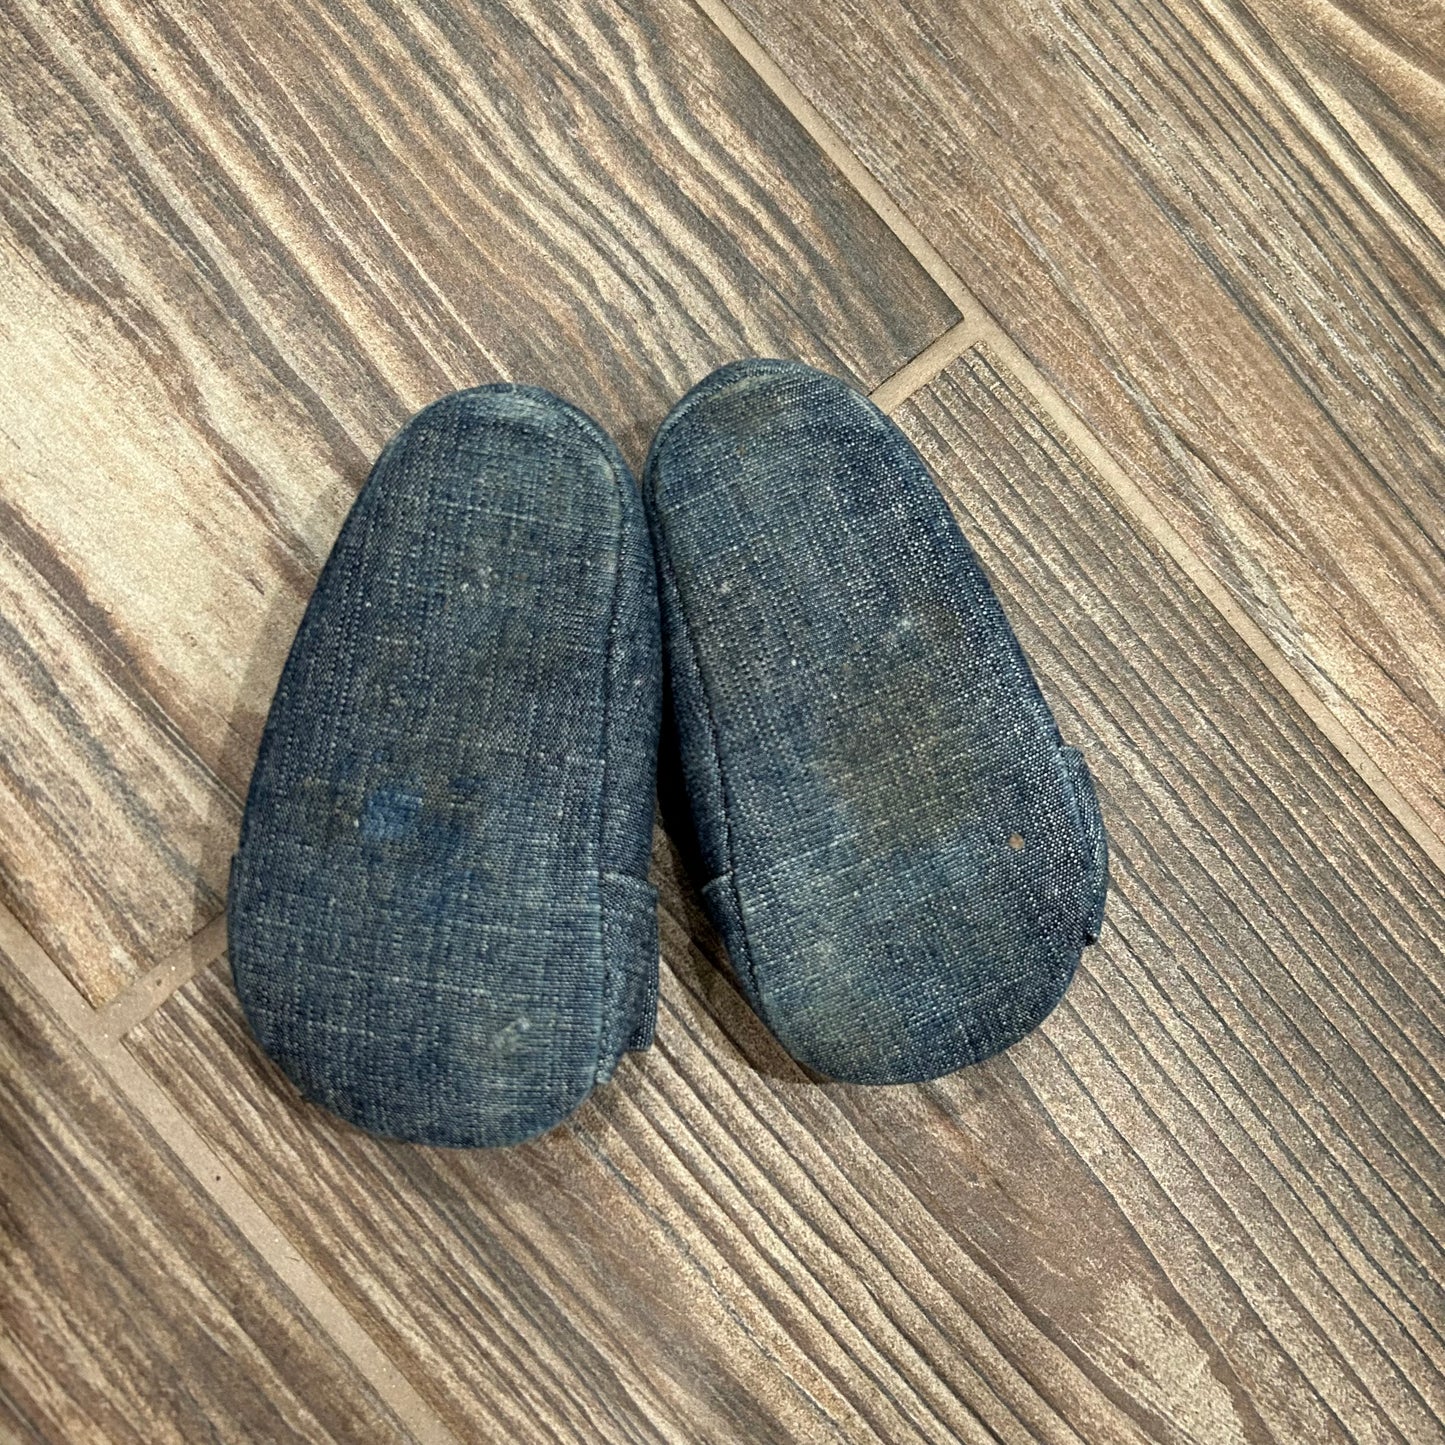 Size 6-12m (Infant) Chambray Bow Shoes - Good Used Condition